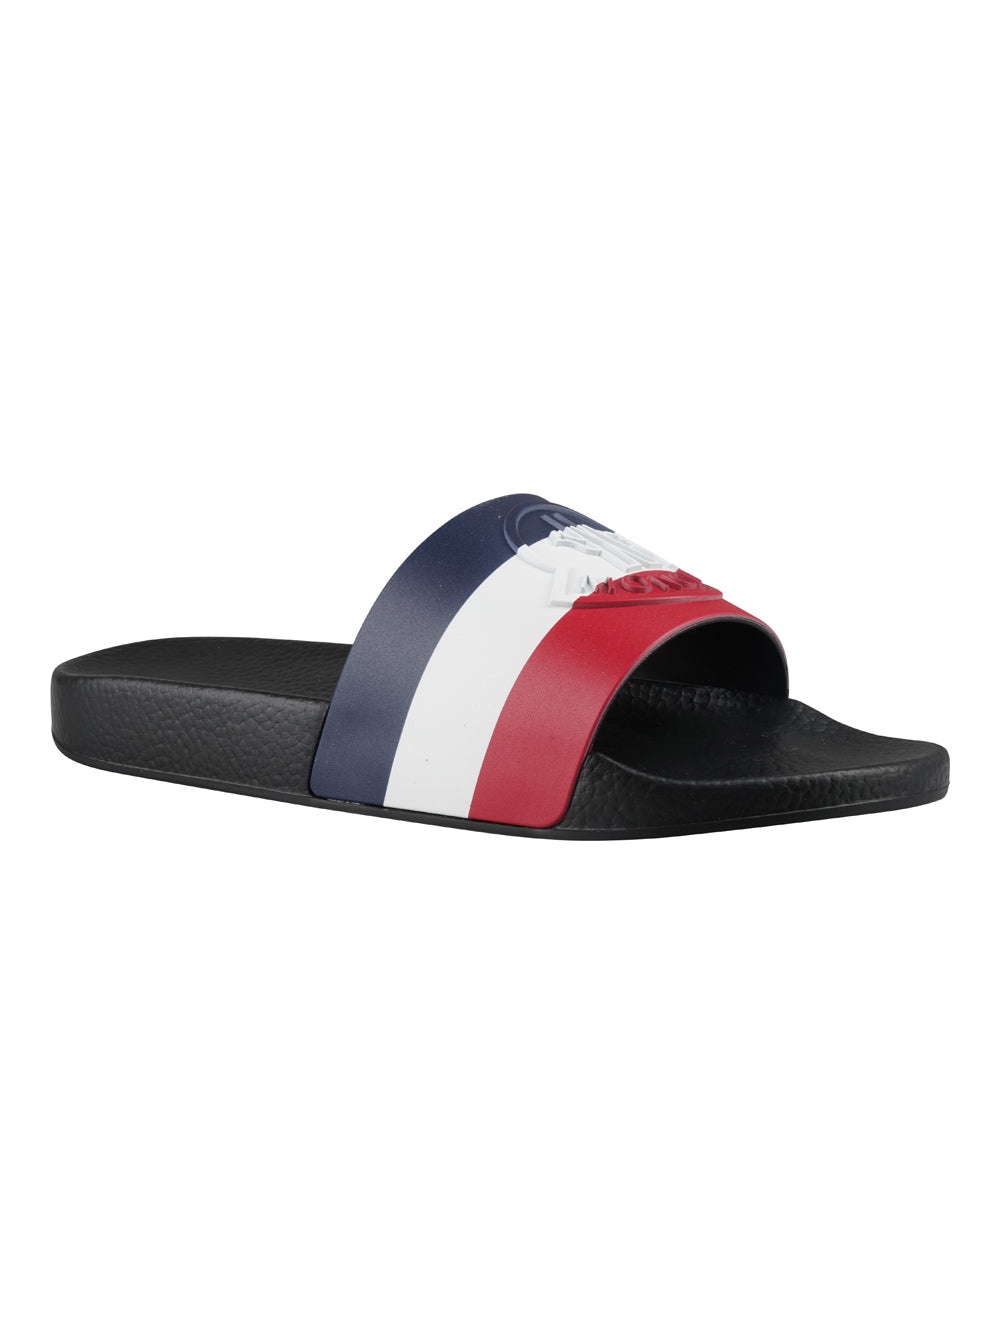 MONCLER MULTICOLOR SLIPPERS - 18